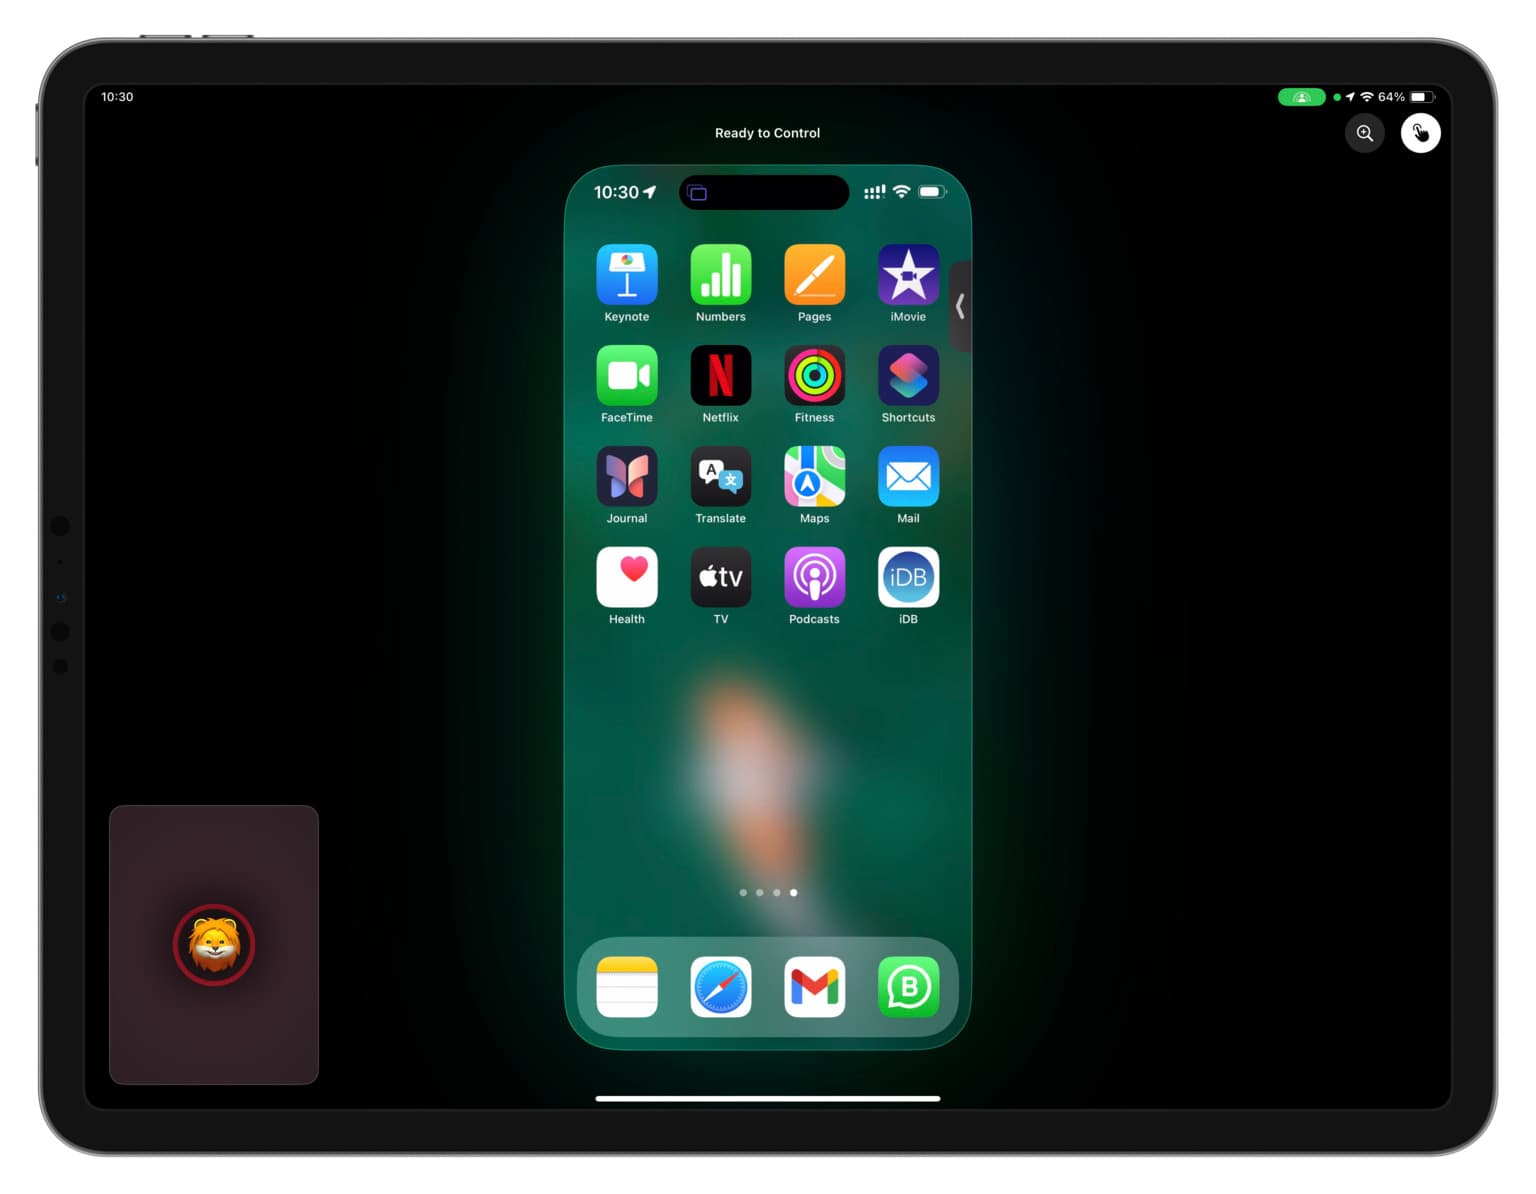 Controlling an iPhone remotely from an iPad